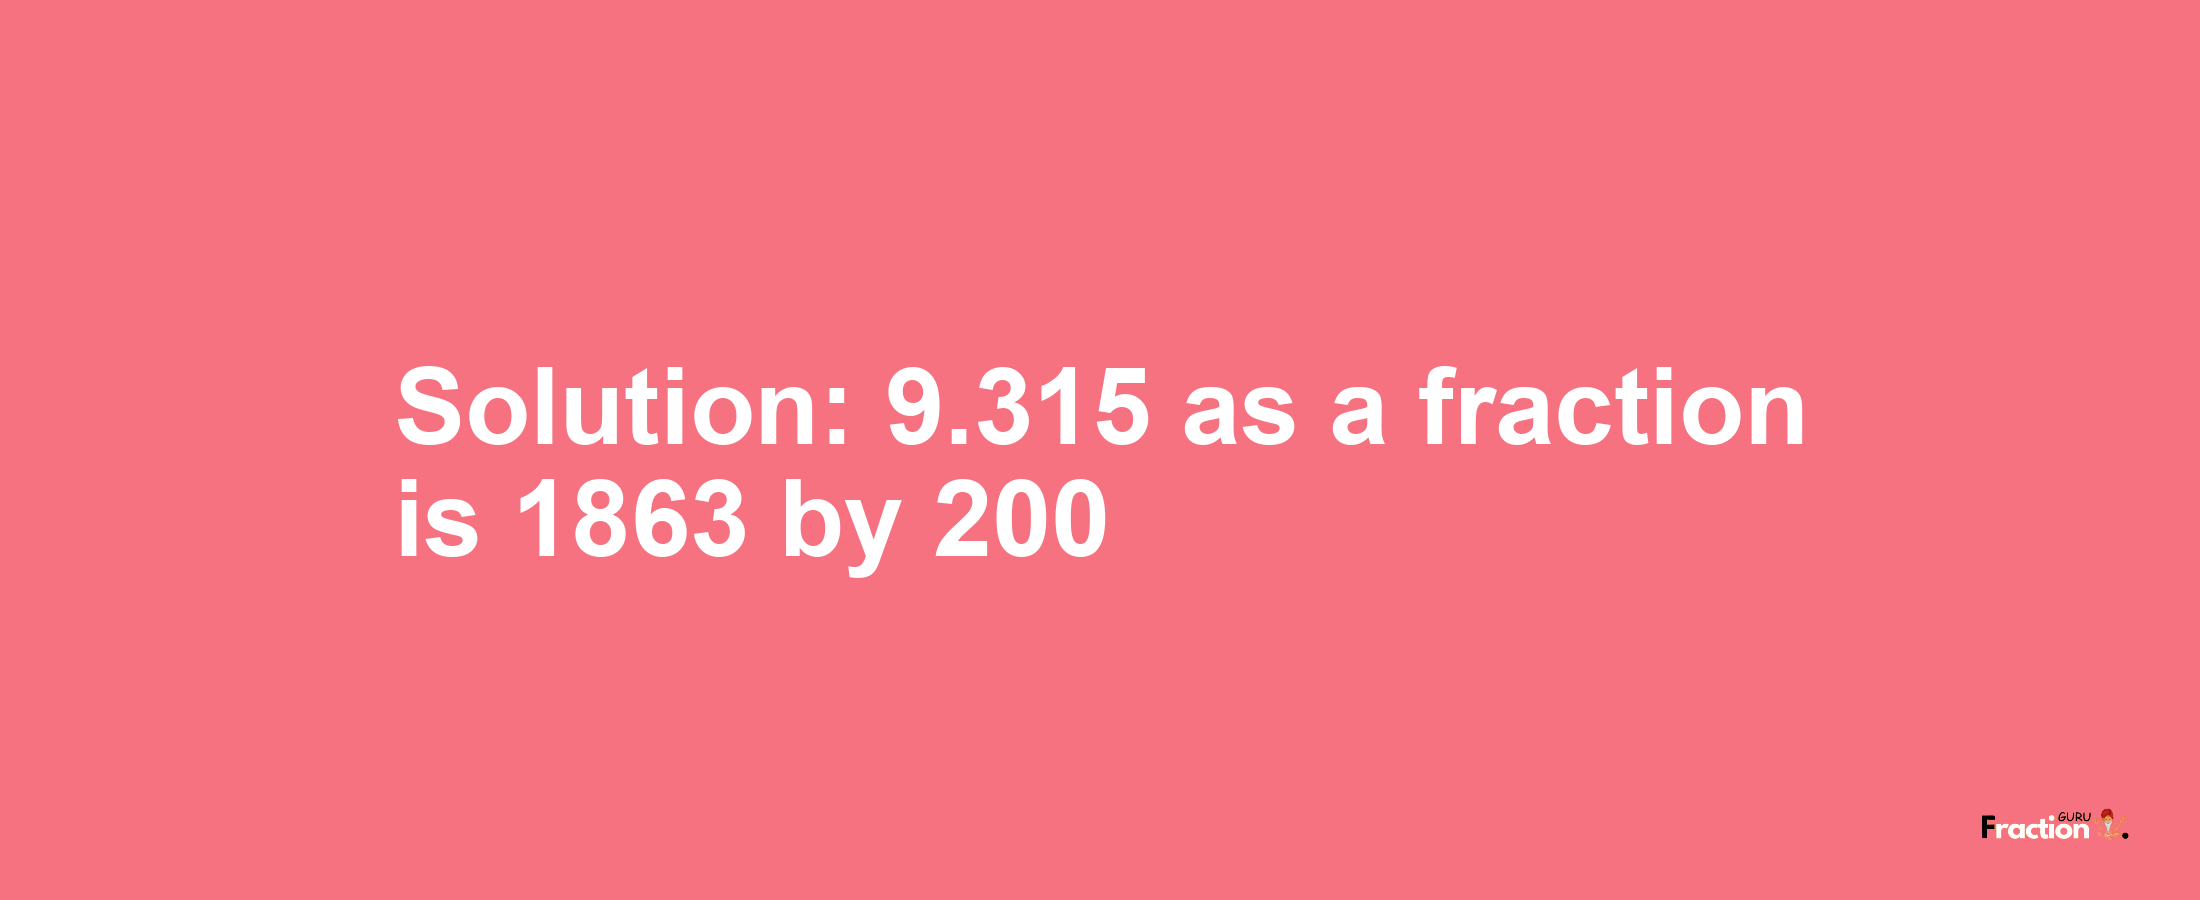 Solution:9.315 as a fraction is 1863/200